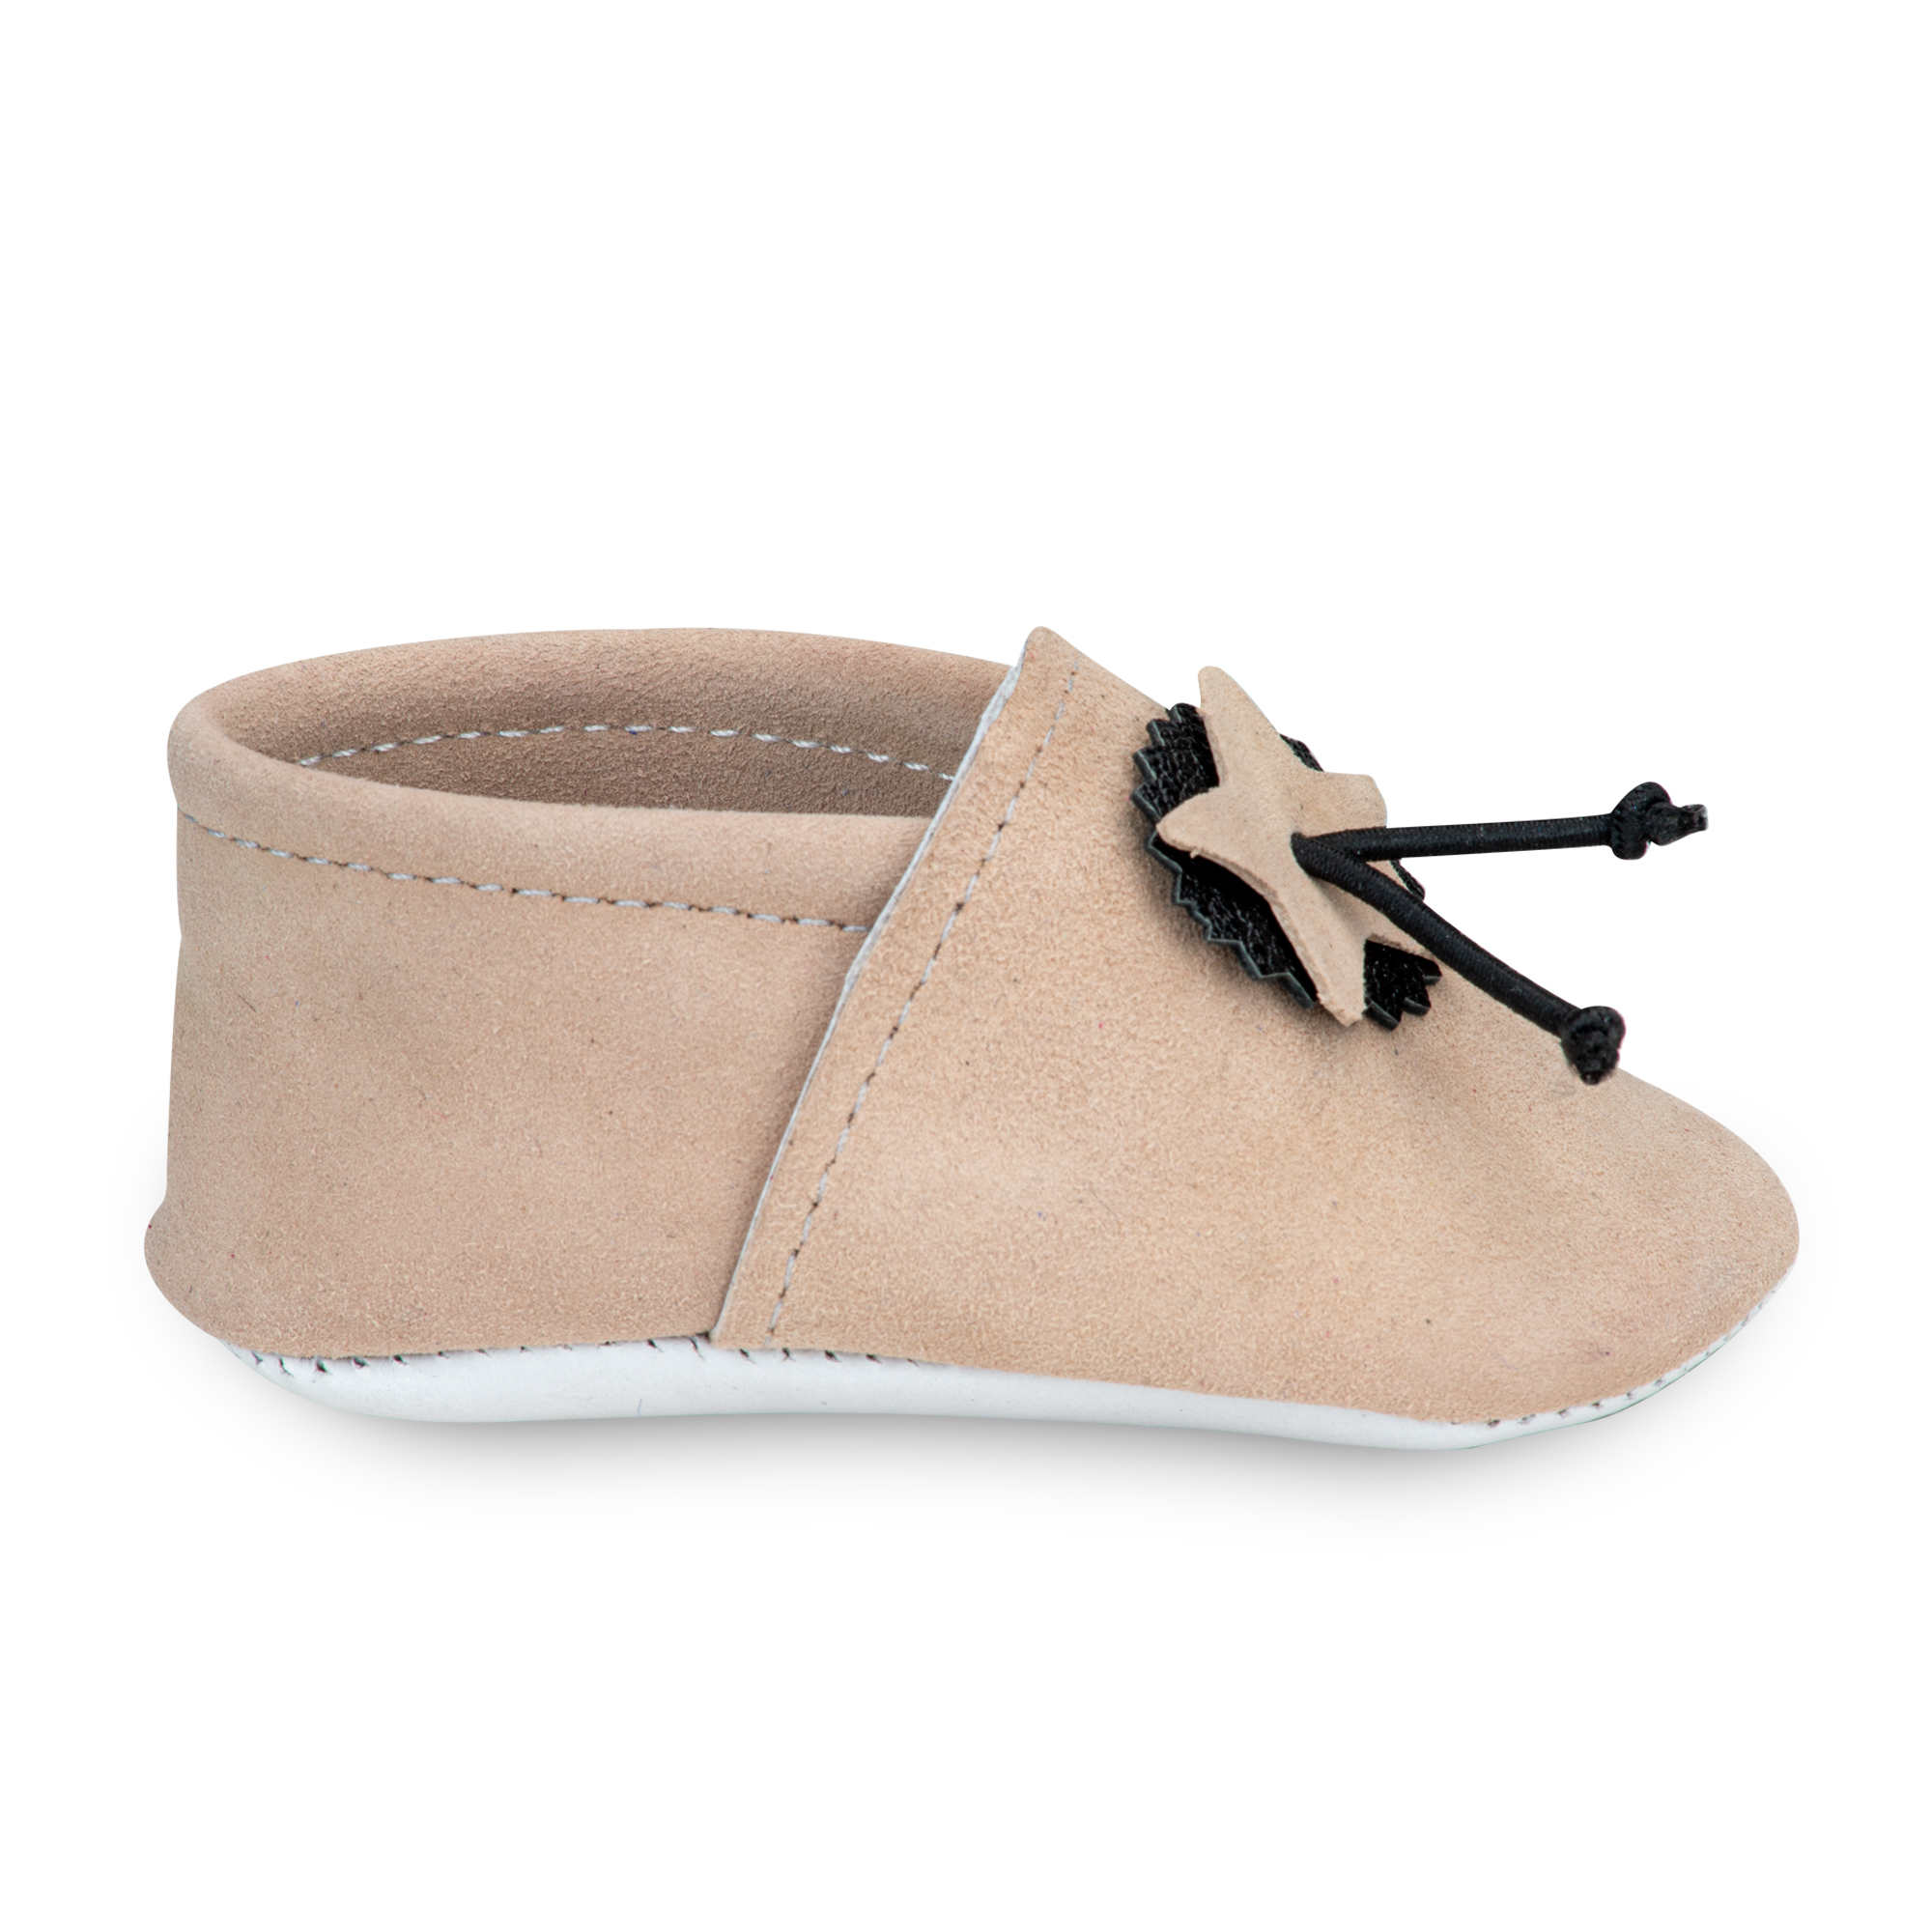 Chaussure Bebe Taille 16 Online